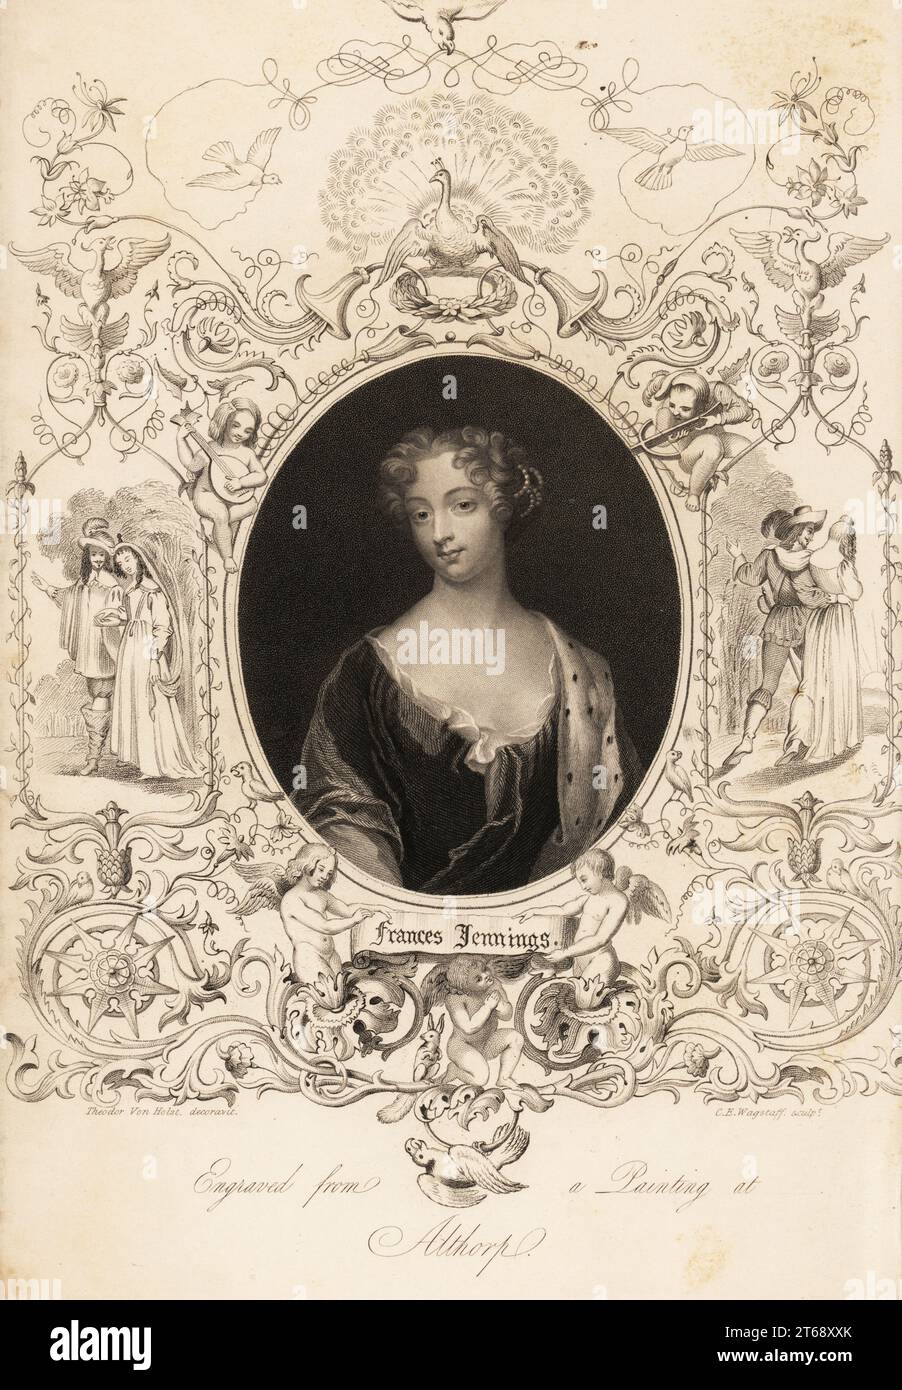 Frances Jennings, Countess of Tyrconnell, maid of honour to the Duchess of York, married to George Hamilton and later Richard Talbot, Earl of Tyrconell, famous beauty at court, 1649-1731. Steel engraving by Charles Edward Wagstaff, with ornate decoration by Theodor von Holst, after an original portrait in the possession of Earl Spencer at Althorp from Mrs Anna Jamesons Memoirs of the Beauties of the Court of King Charles the Second, Henry Coburn, London, 1838. Stock Photo